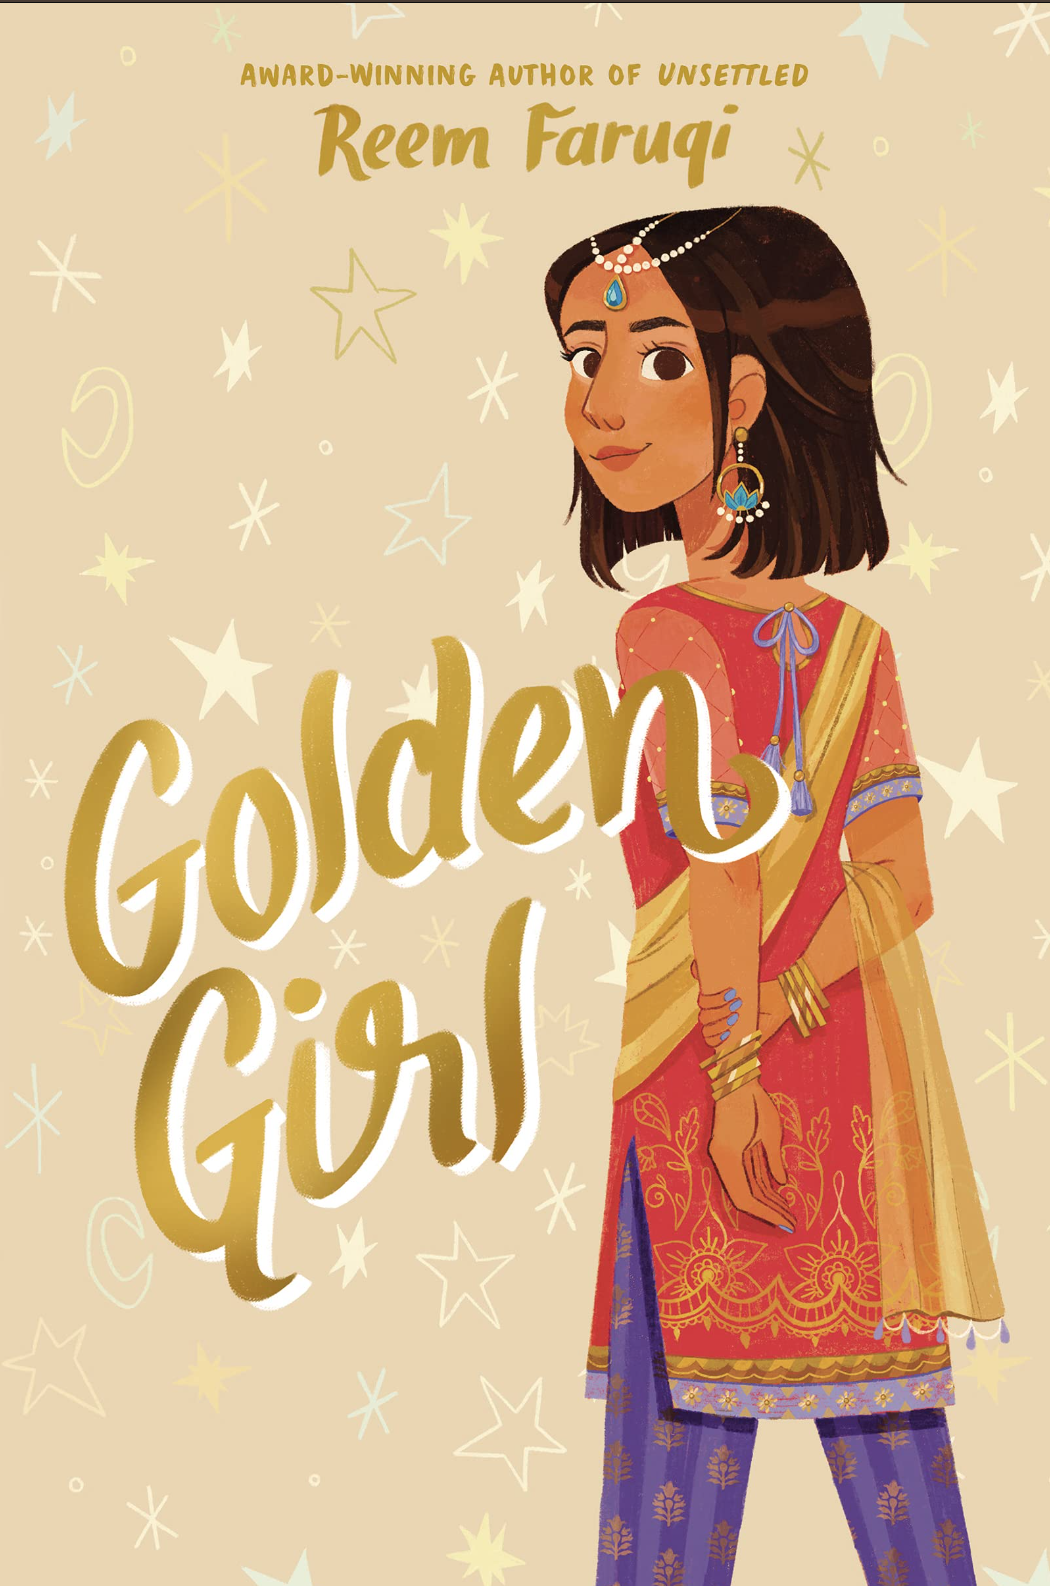 Aafiyah Qamar, a Pakistani-American girl, is holding her left arm behind her with her right arm and looking towards the bookÃ¢â‚¬â„¢s title. Written in a golden marker font, the tile reads Ã¢â‚¬Å“Golden GirlÃ¢â‚¬Â in front of a gold background with hand drawn stars and moons. 